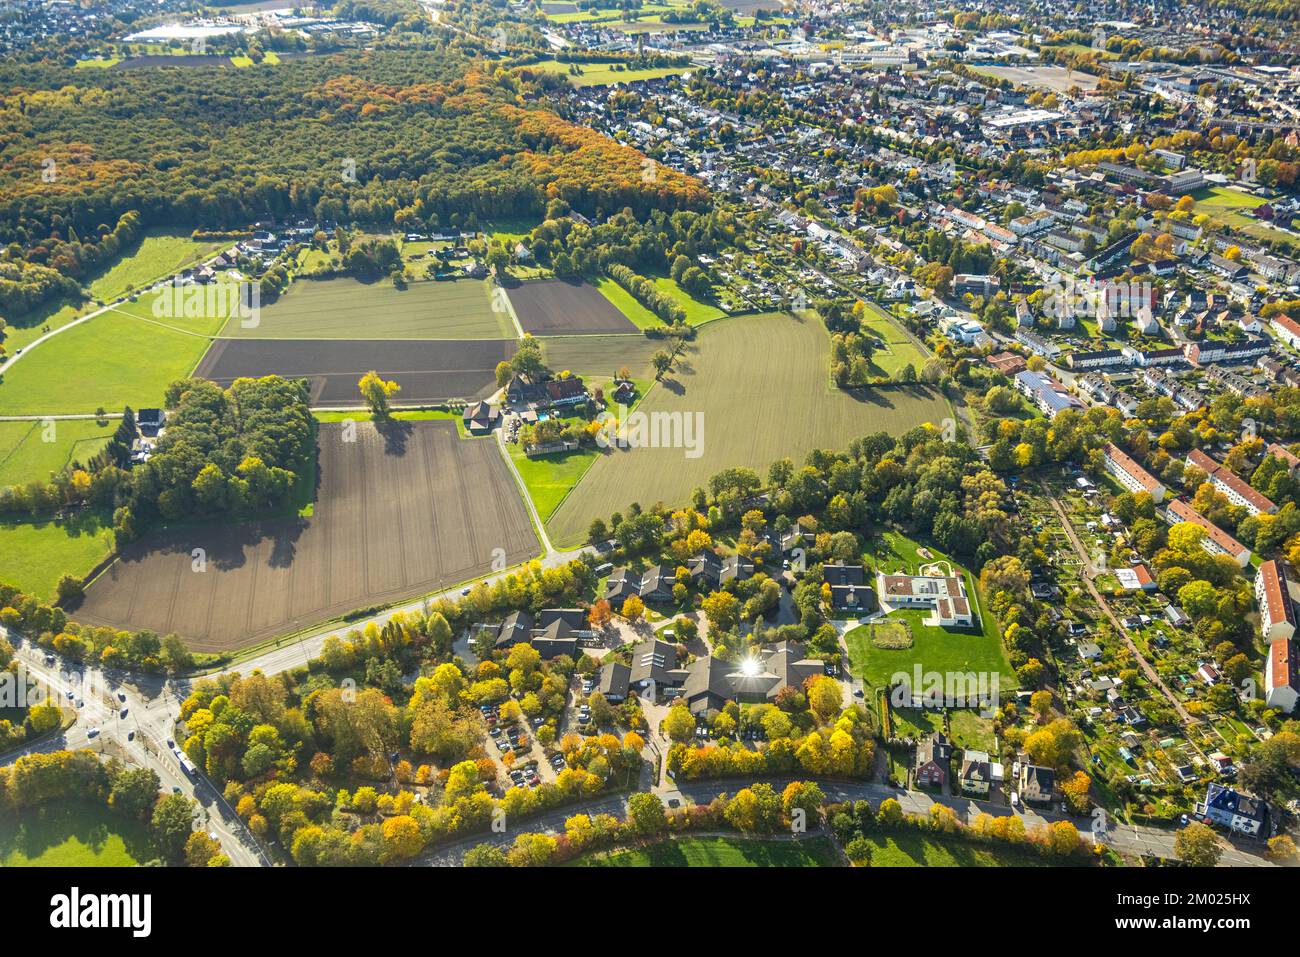 Aerial view, Ahsestrolche sports daycare center, meadows and fields with location overview, Ahsepark Business Innovation Center, Rhnyern, Hamm, Ruhr a Stock Photo